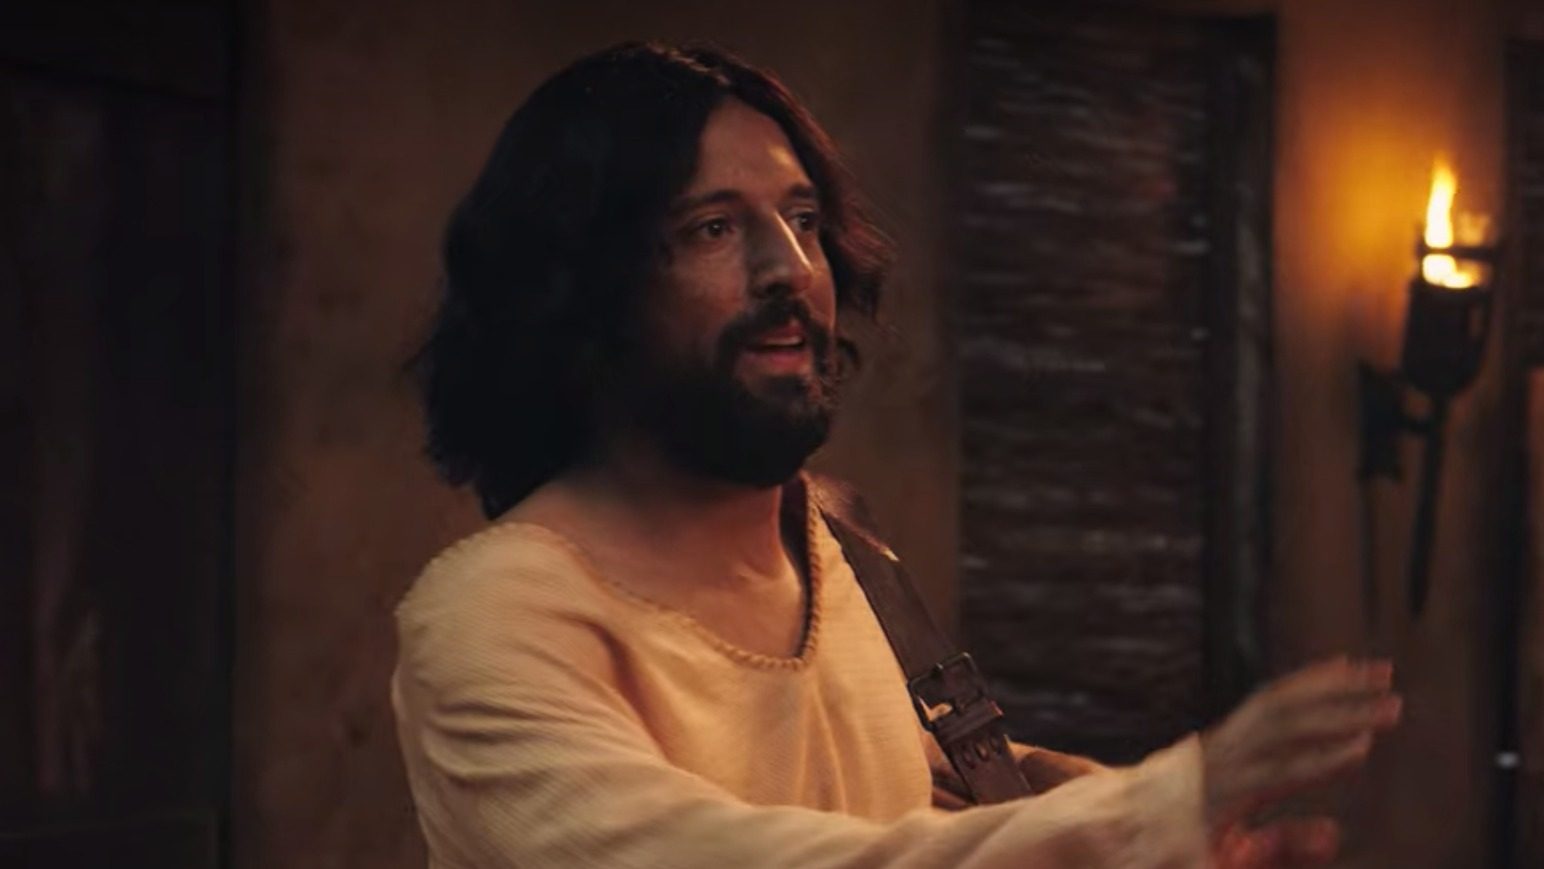 Brazil supreme court sides with Netflix over gay Jesus comedy removal